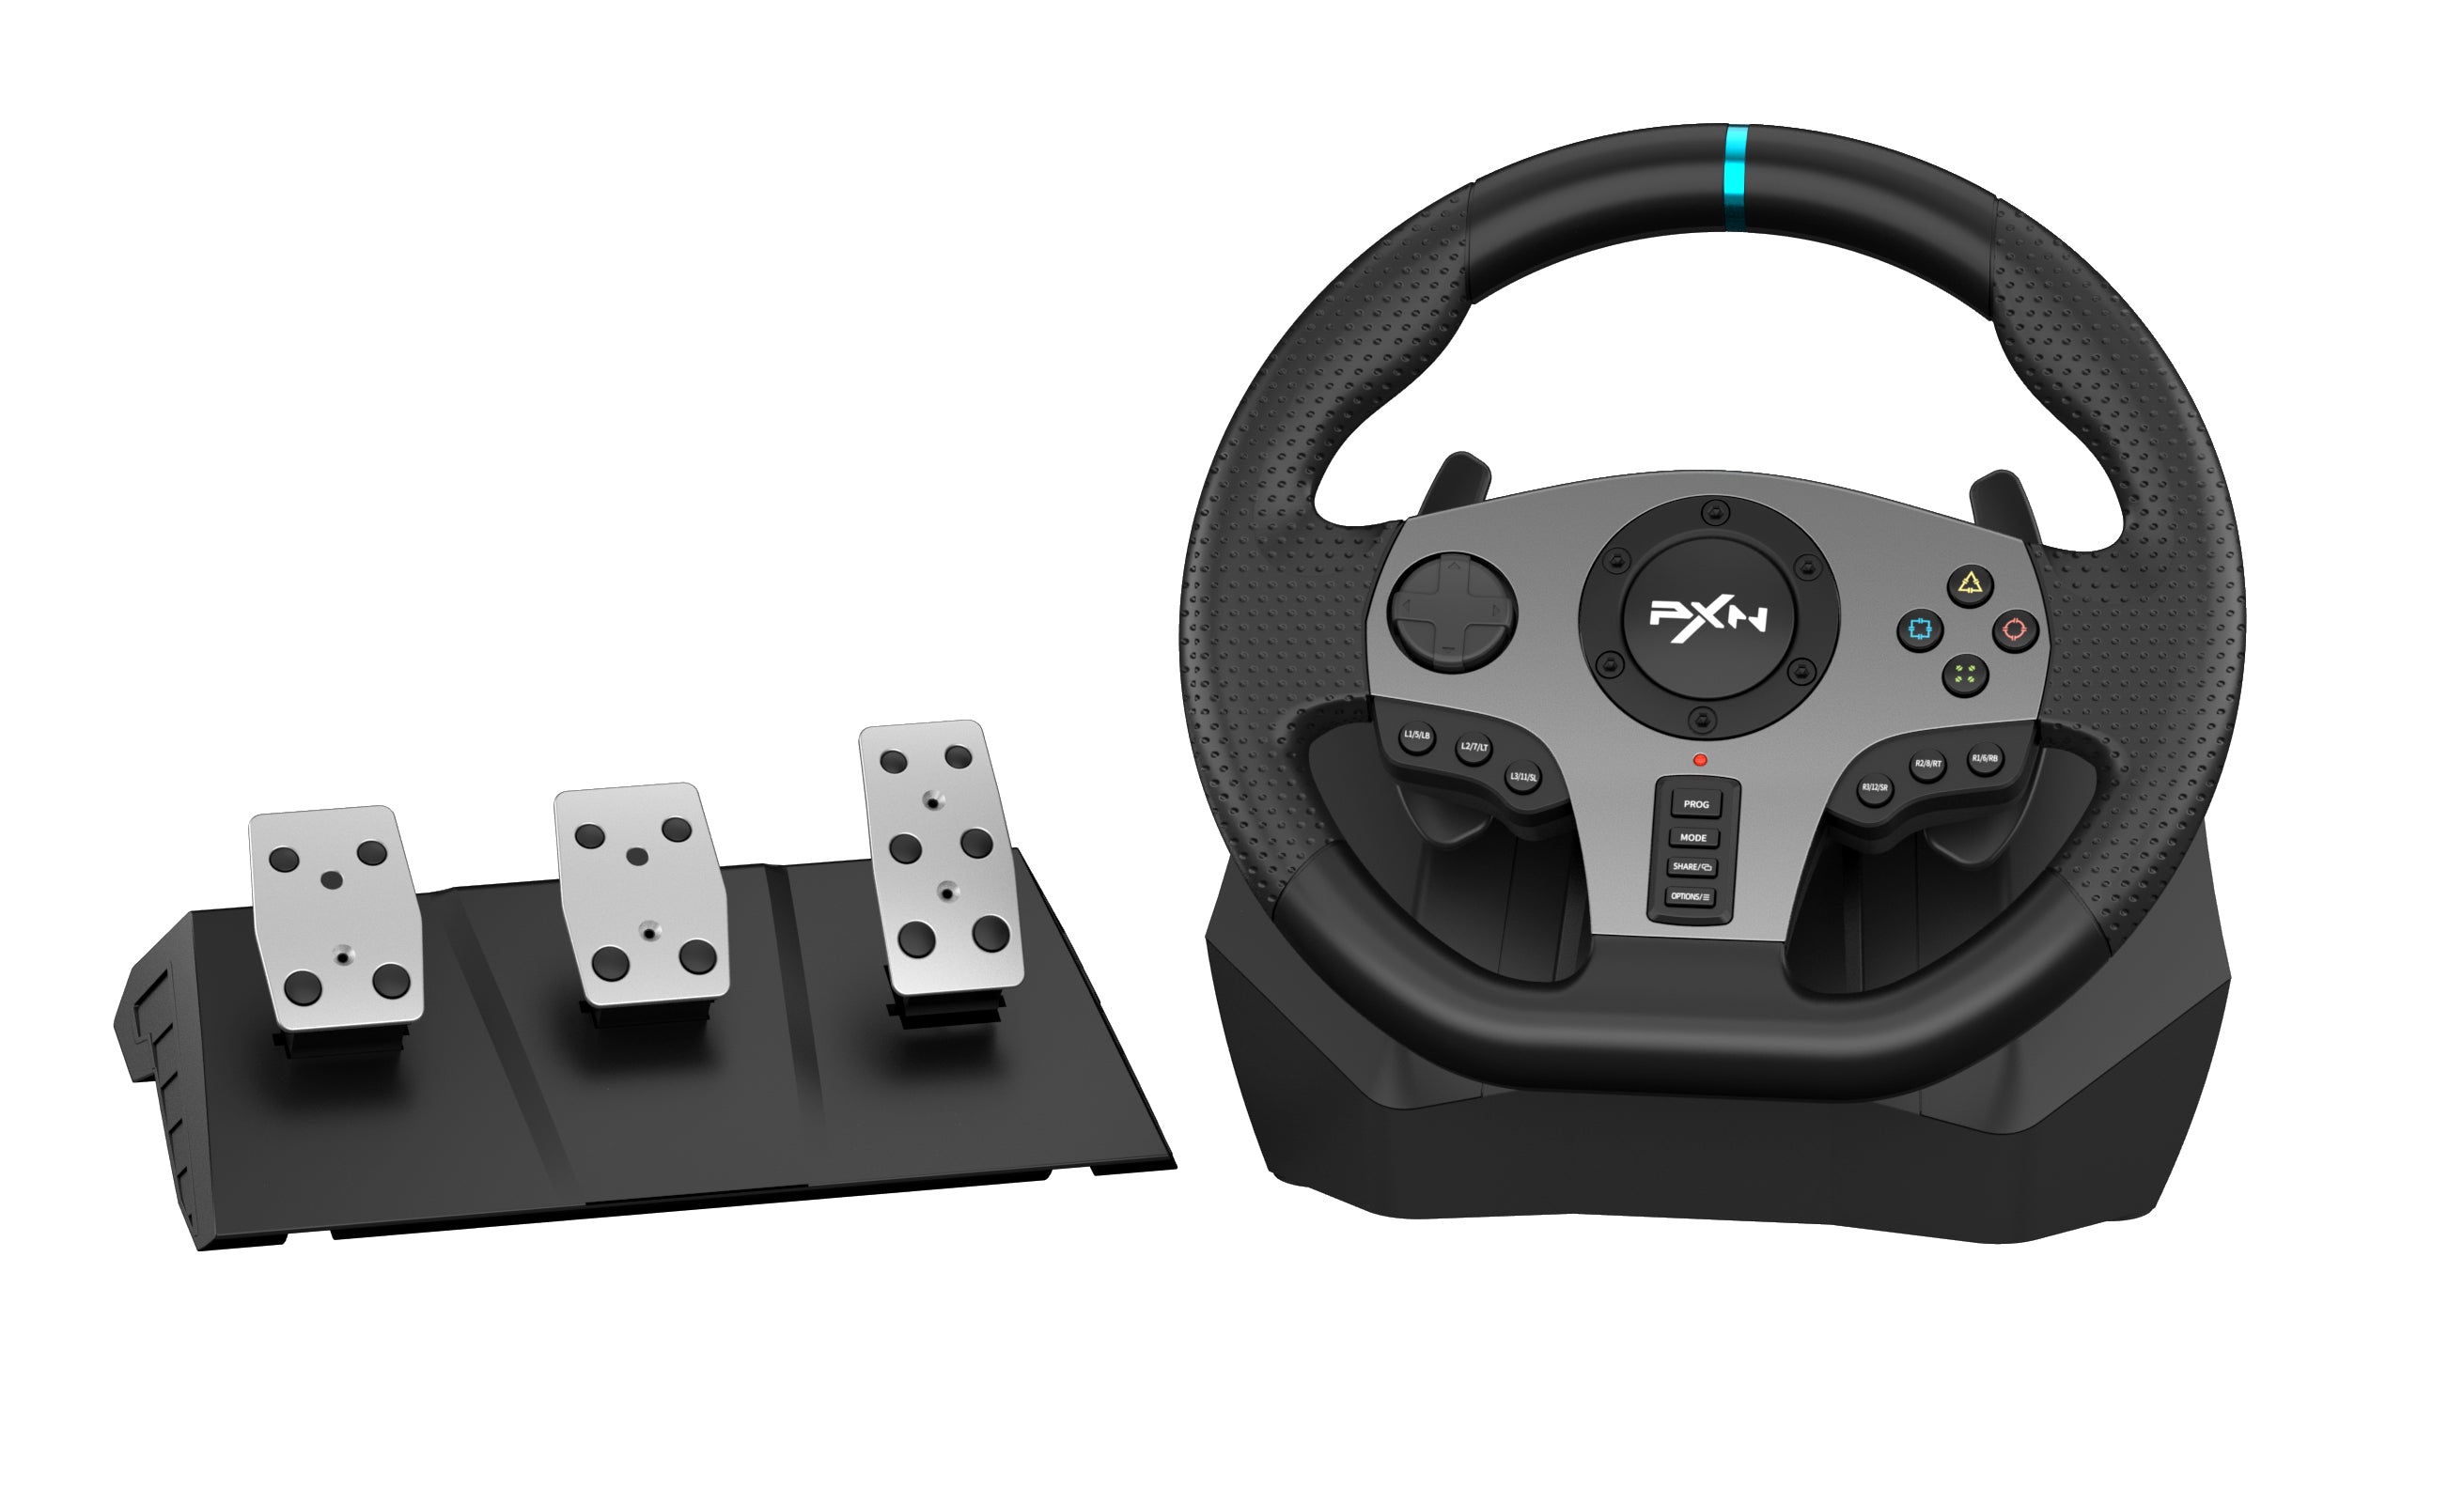  PXN V9 Steering Wheel for PC - Vibration Feedback Gaming Racing  Wheel with Shifter and Pedals Used- Good for PC PS4, PS3, Nintendo Switch :  Video Games